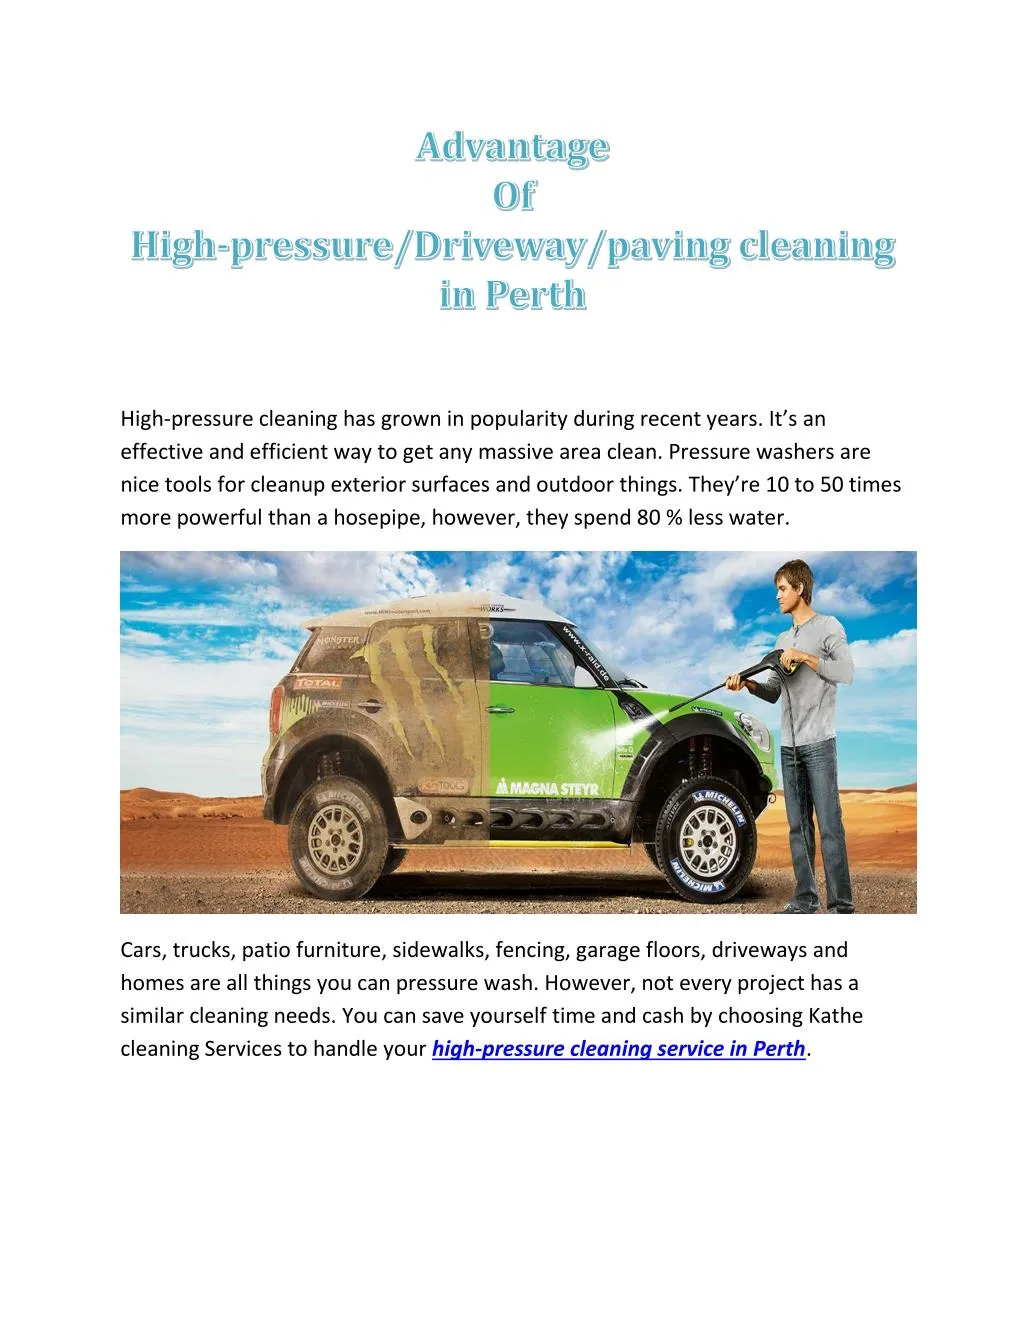 high pressure cleaning has grown in popularity